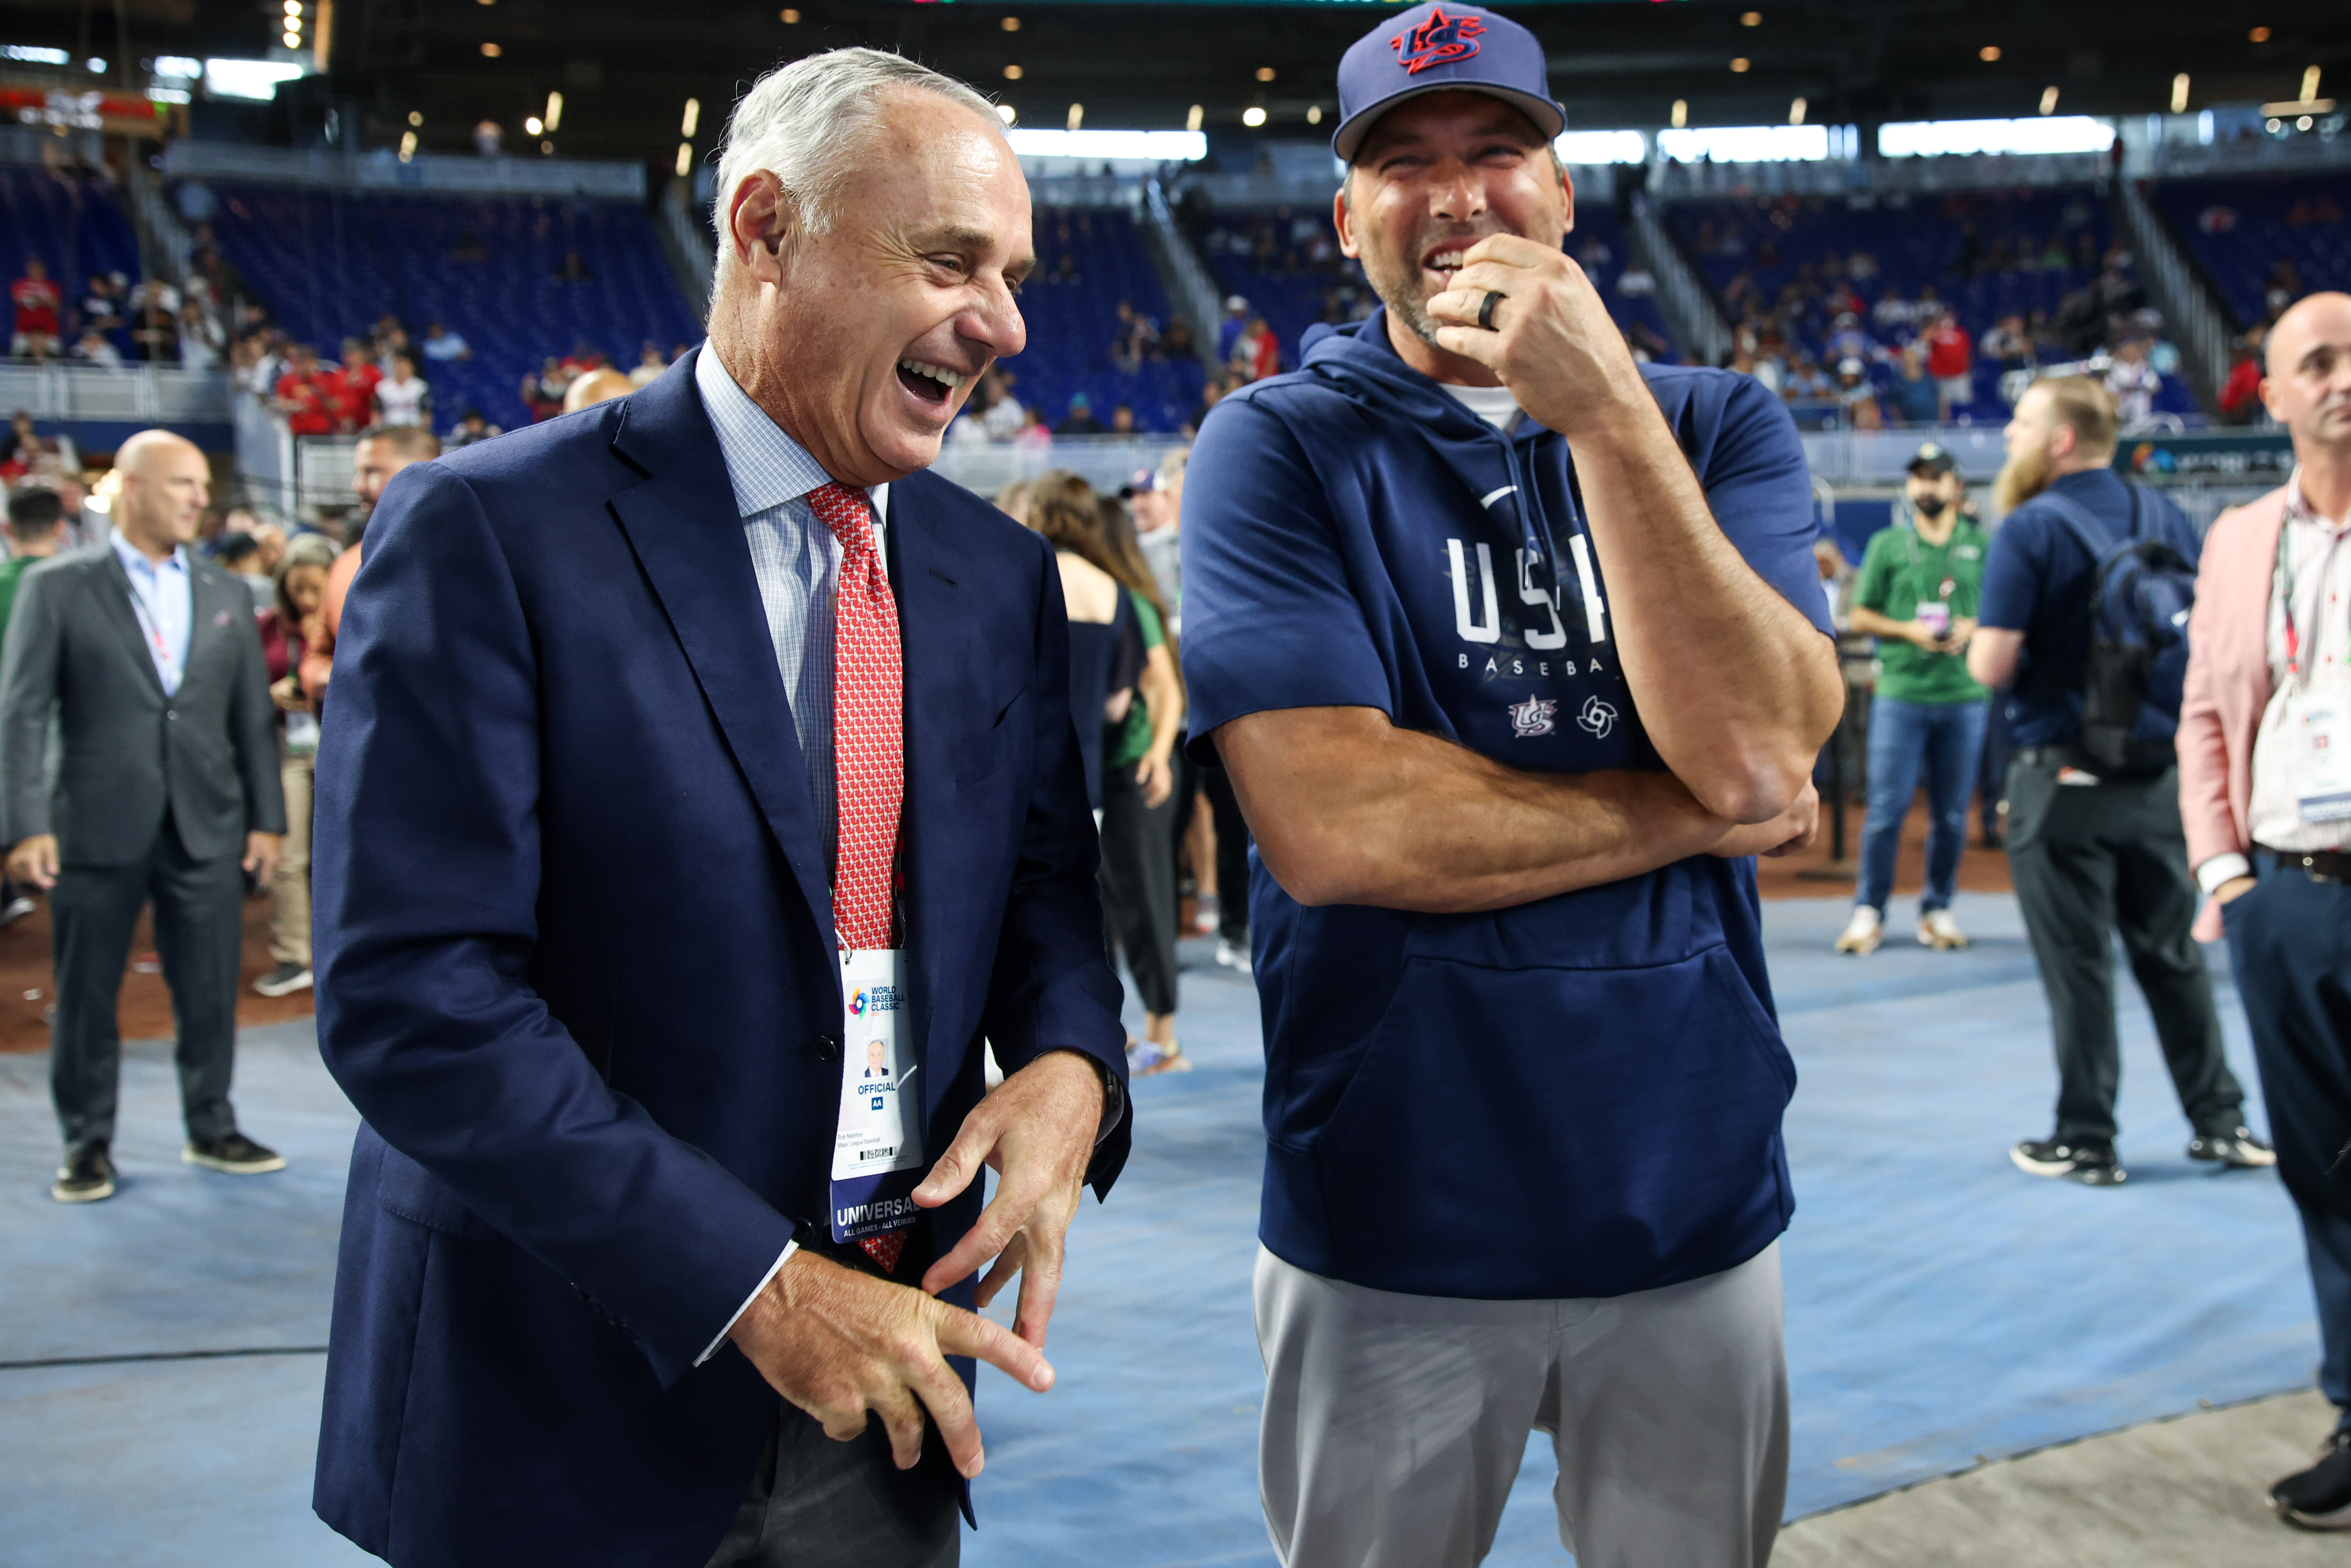 MLB commissioner Rob Manfred (L) talks to Mark DeRosa, manager of USA, after the World Baseball Classic Championship game against Japan at LoanDepot Park in Miami, Florida, March 21, 2023. /CFP 